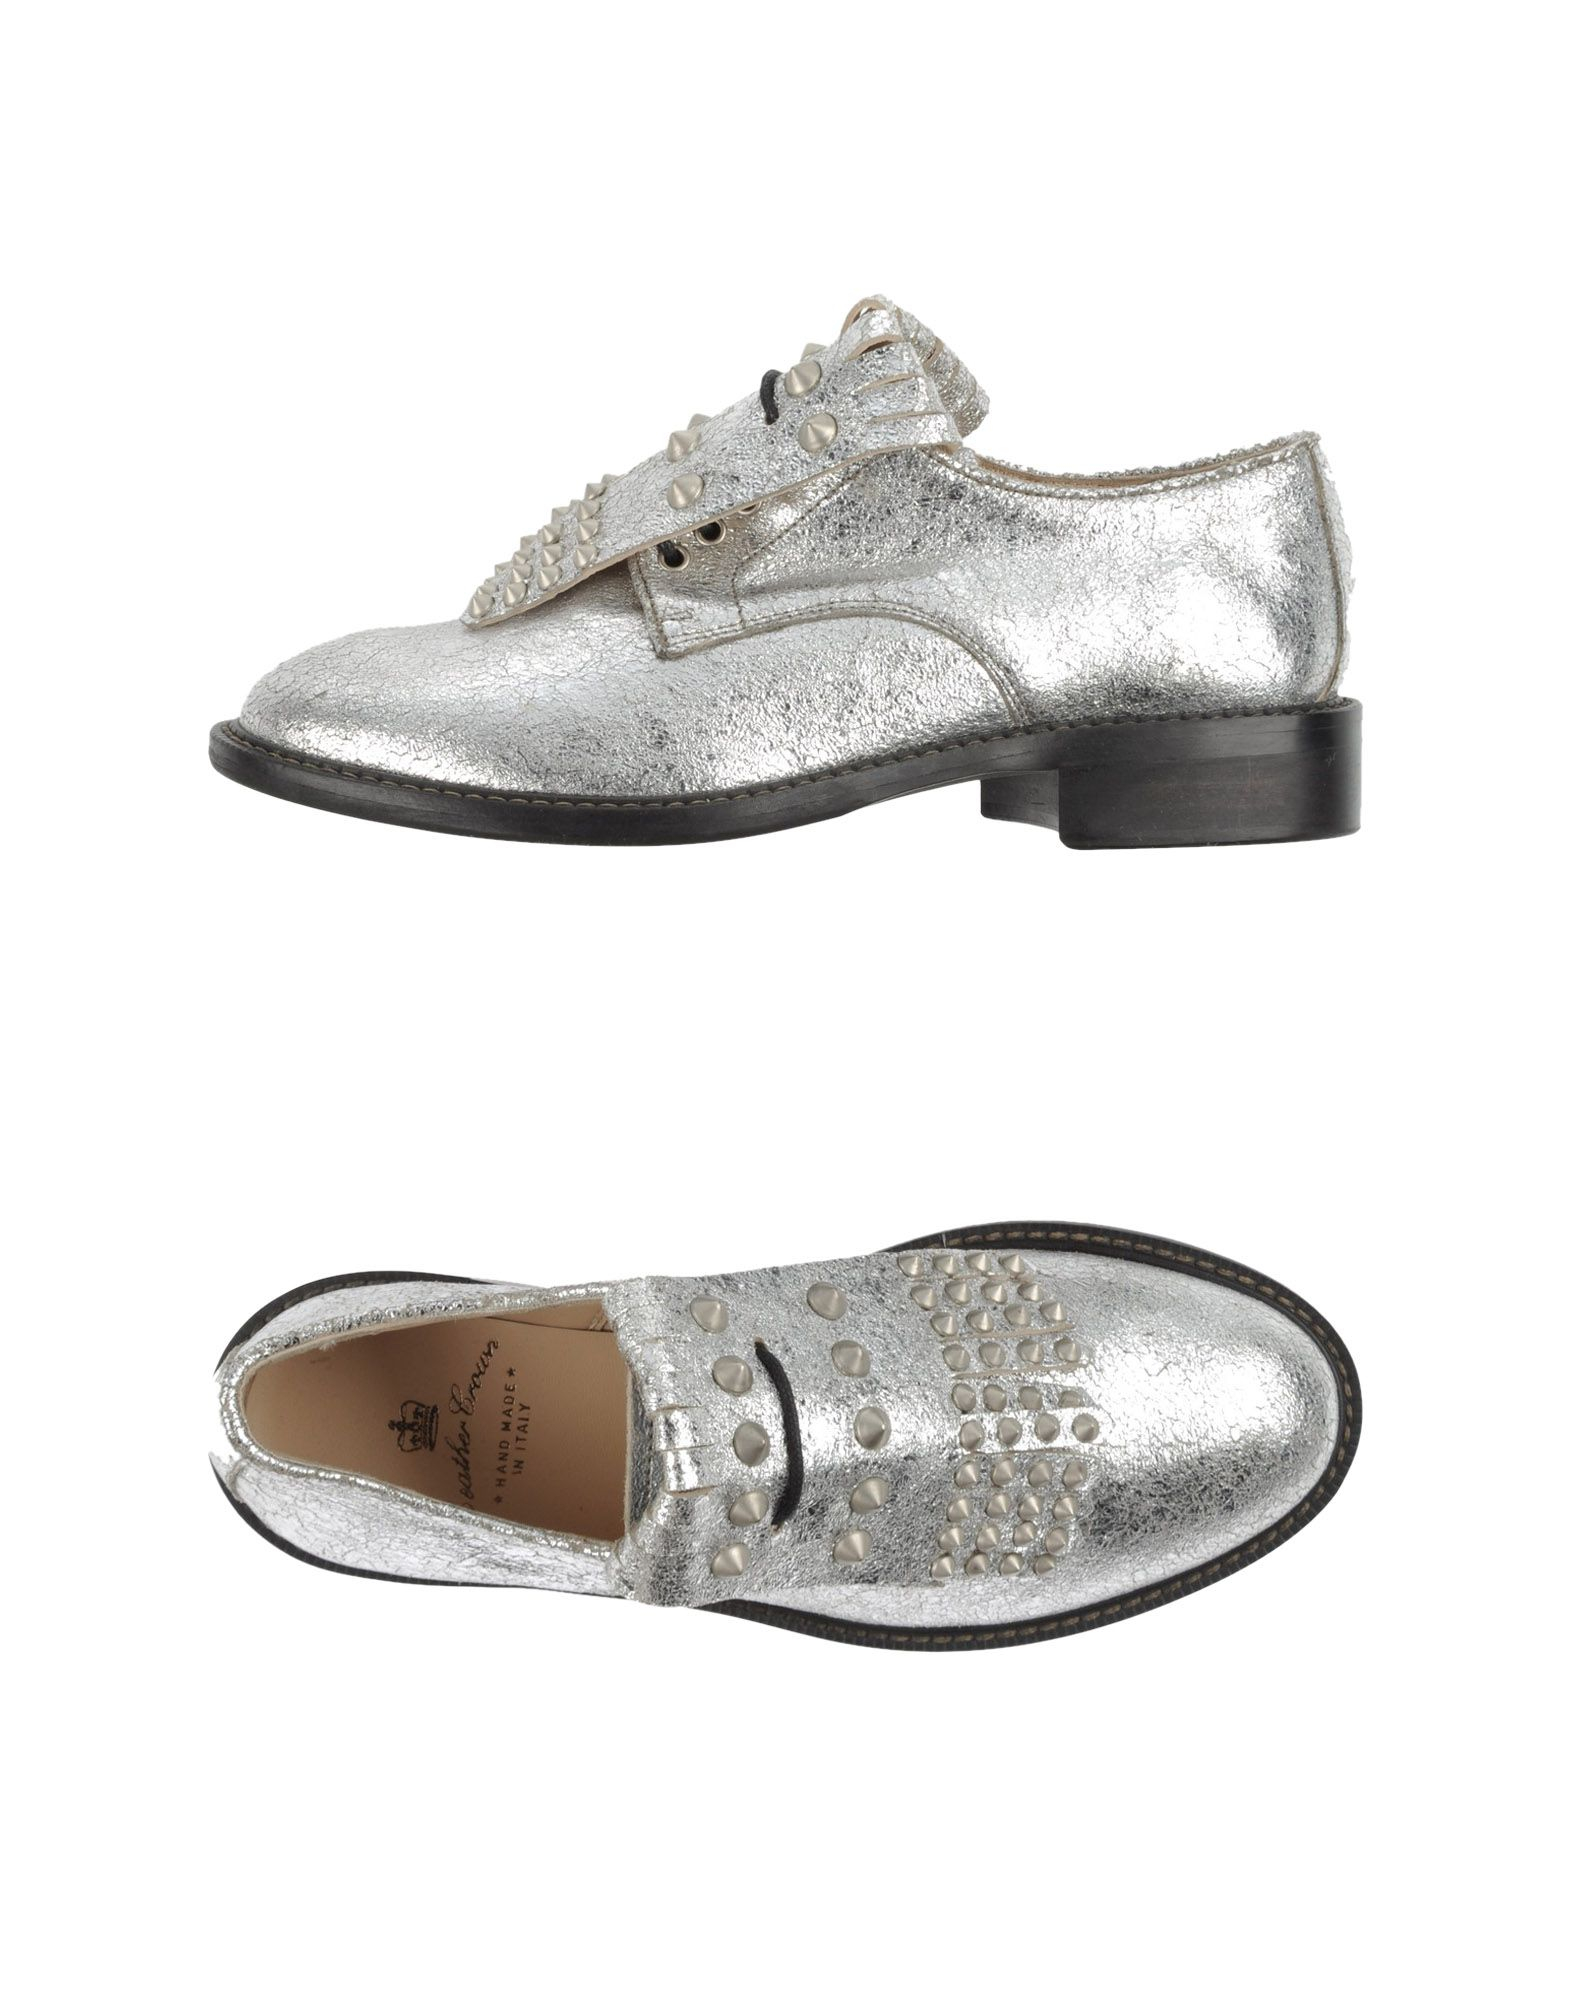 Lyst - Leather crown Lace-up Shoes in Metallic